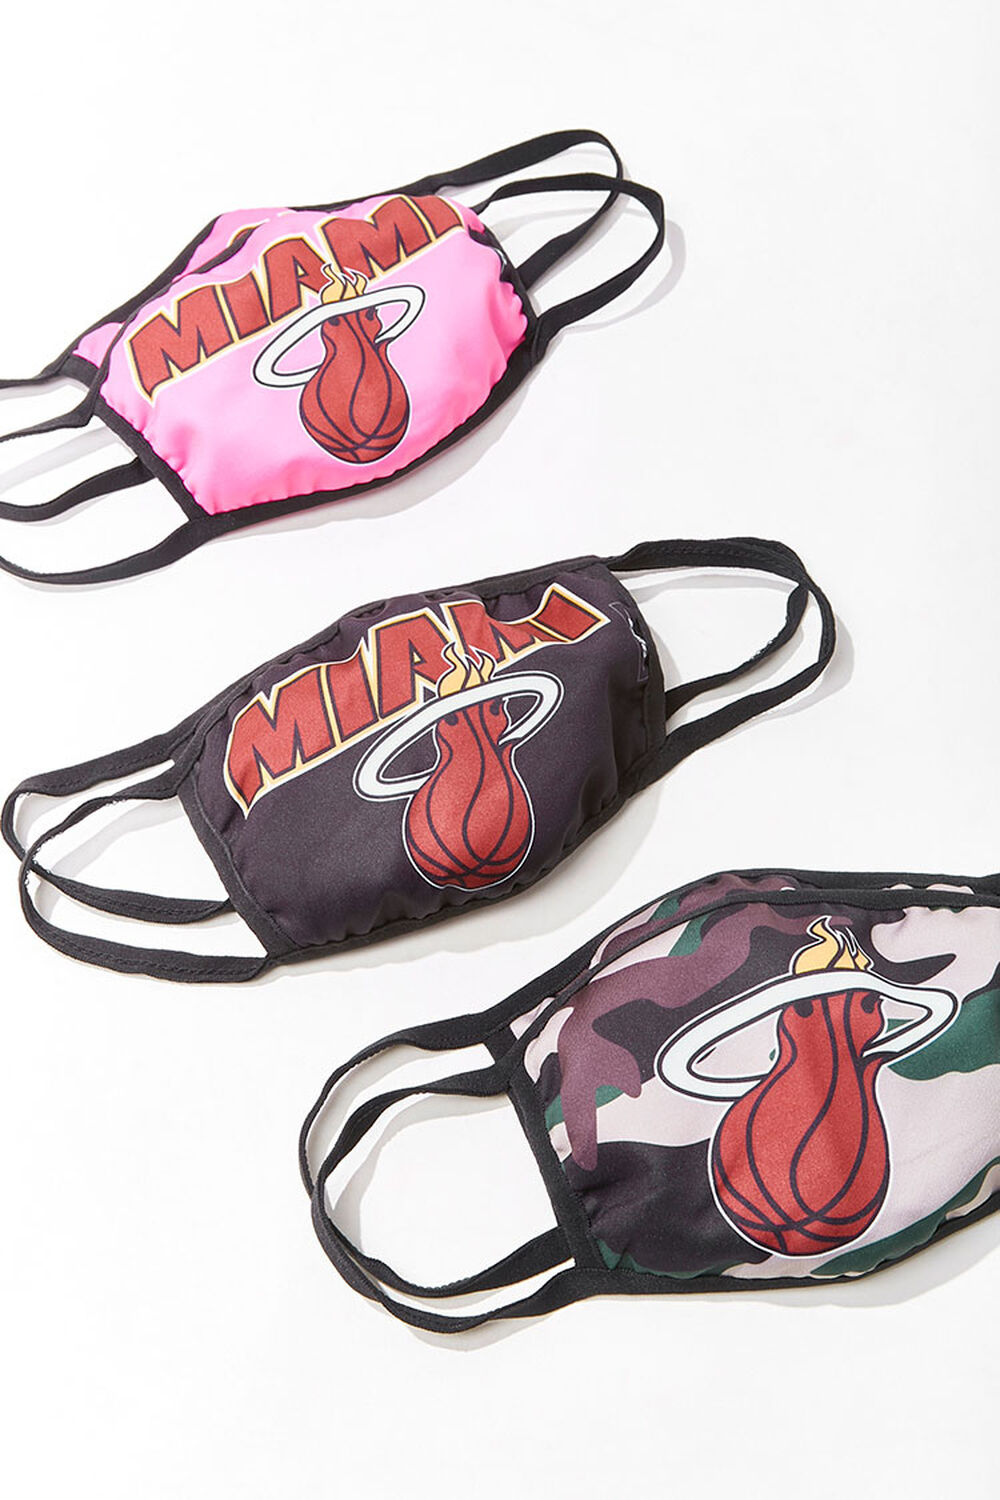 Miami Heat Face Mask Set - Assorted 2 Pack, image 1